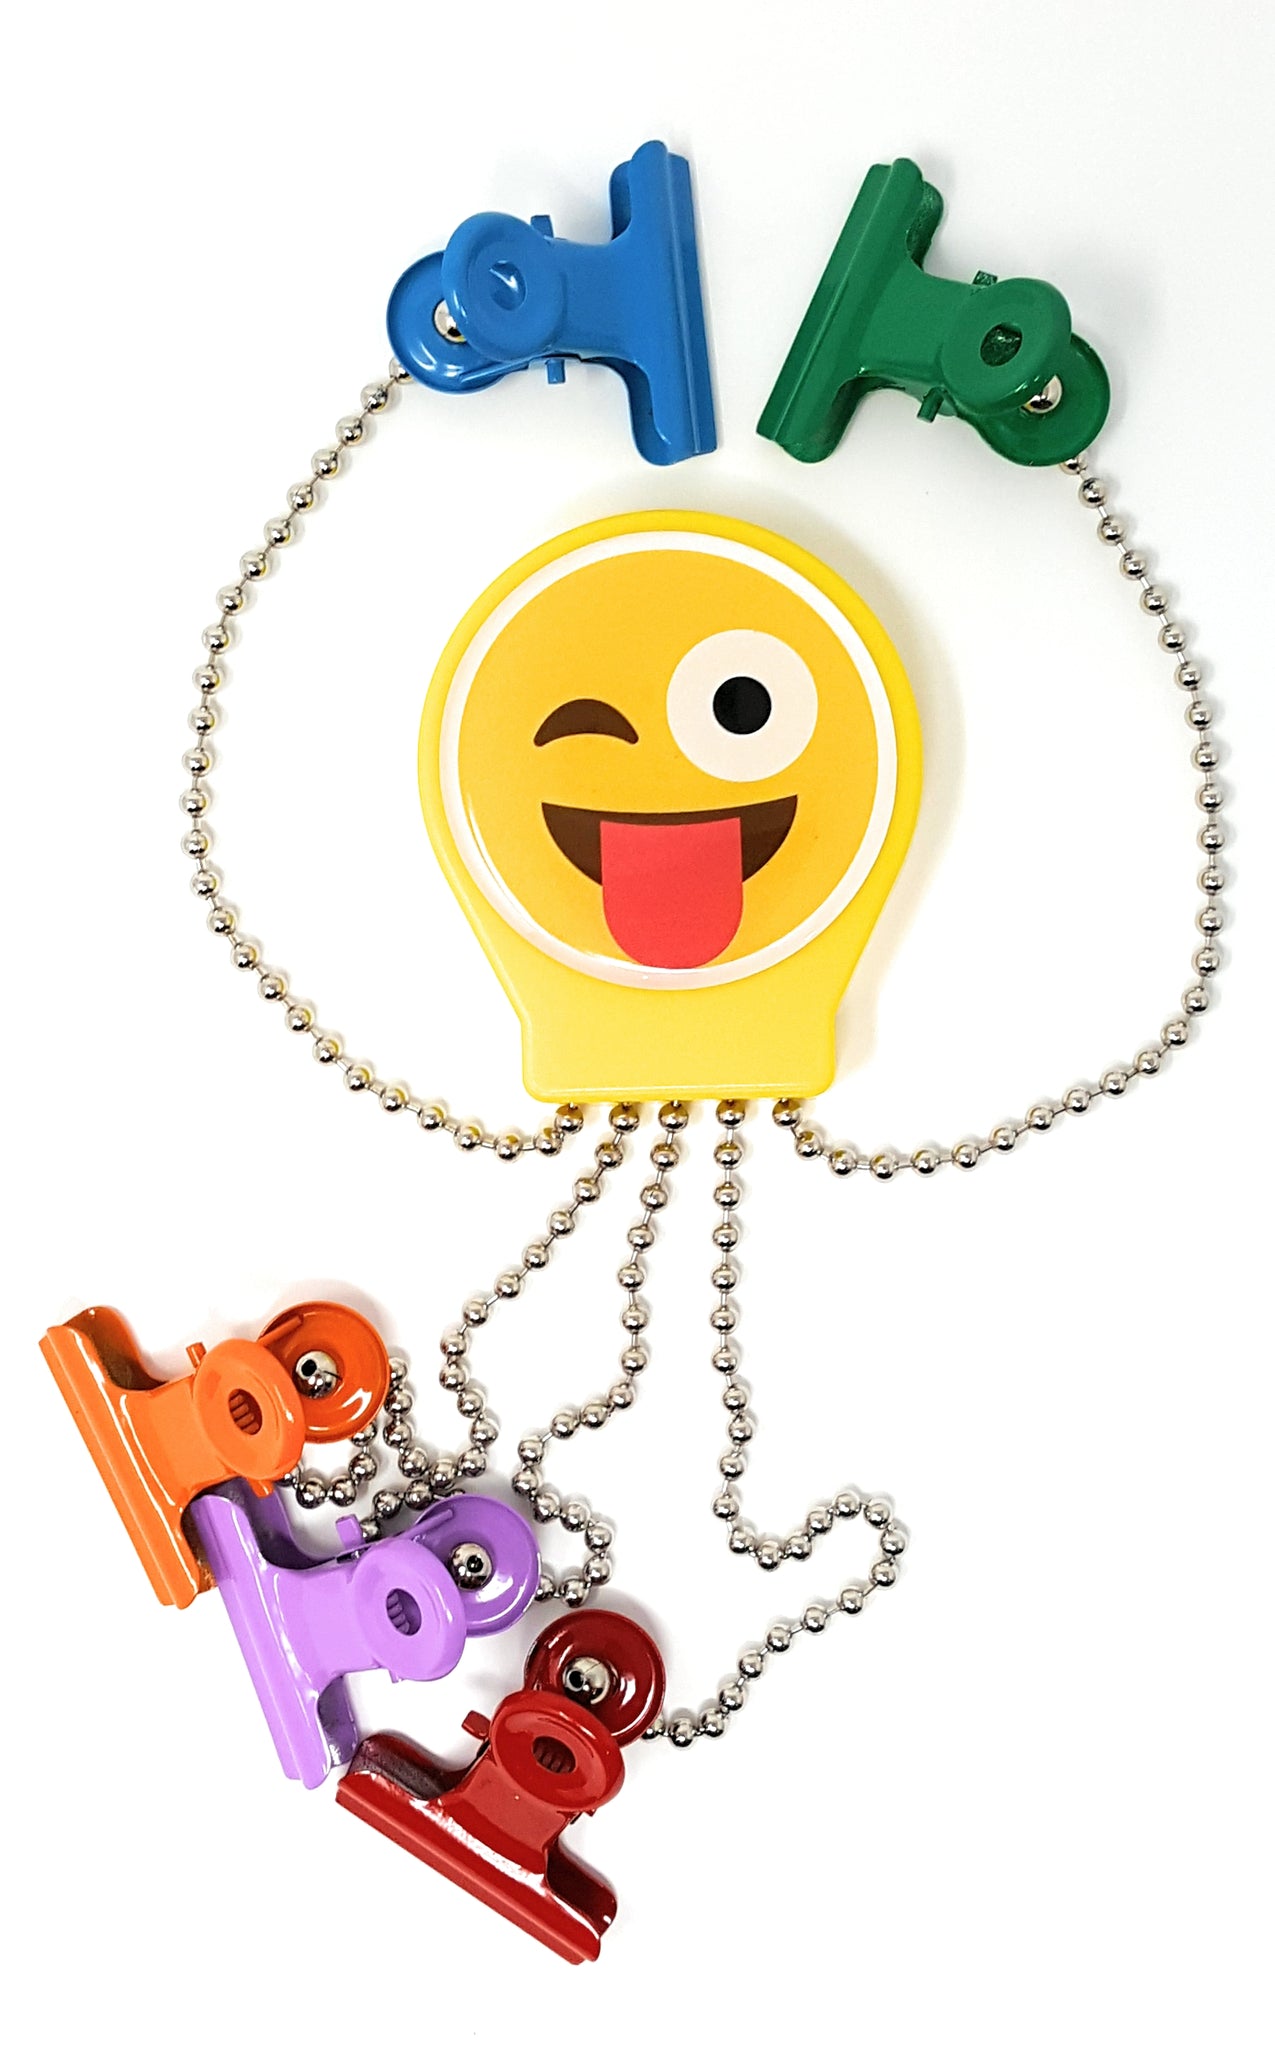 OctoClip Refrigerator Magnet – Wink Wacky Emoji with Multi Colored Clips